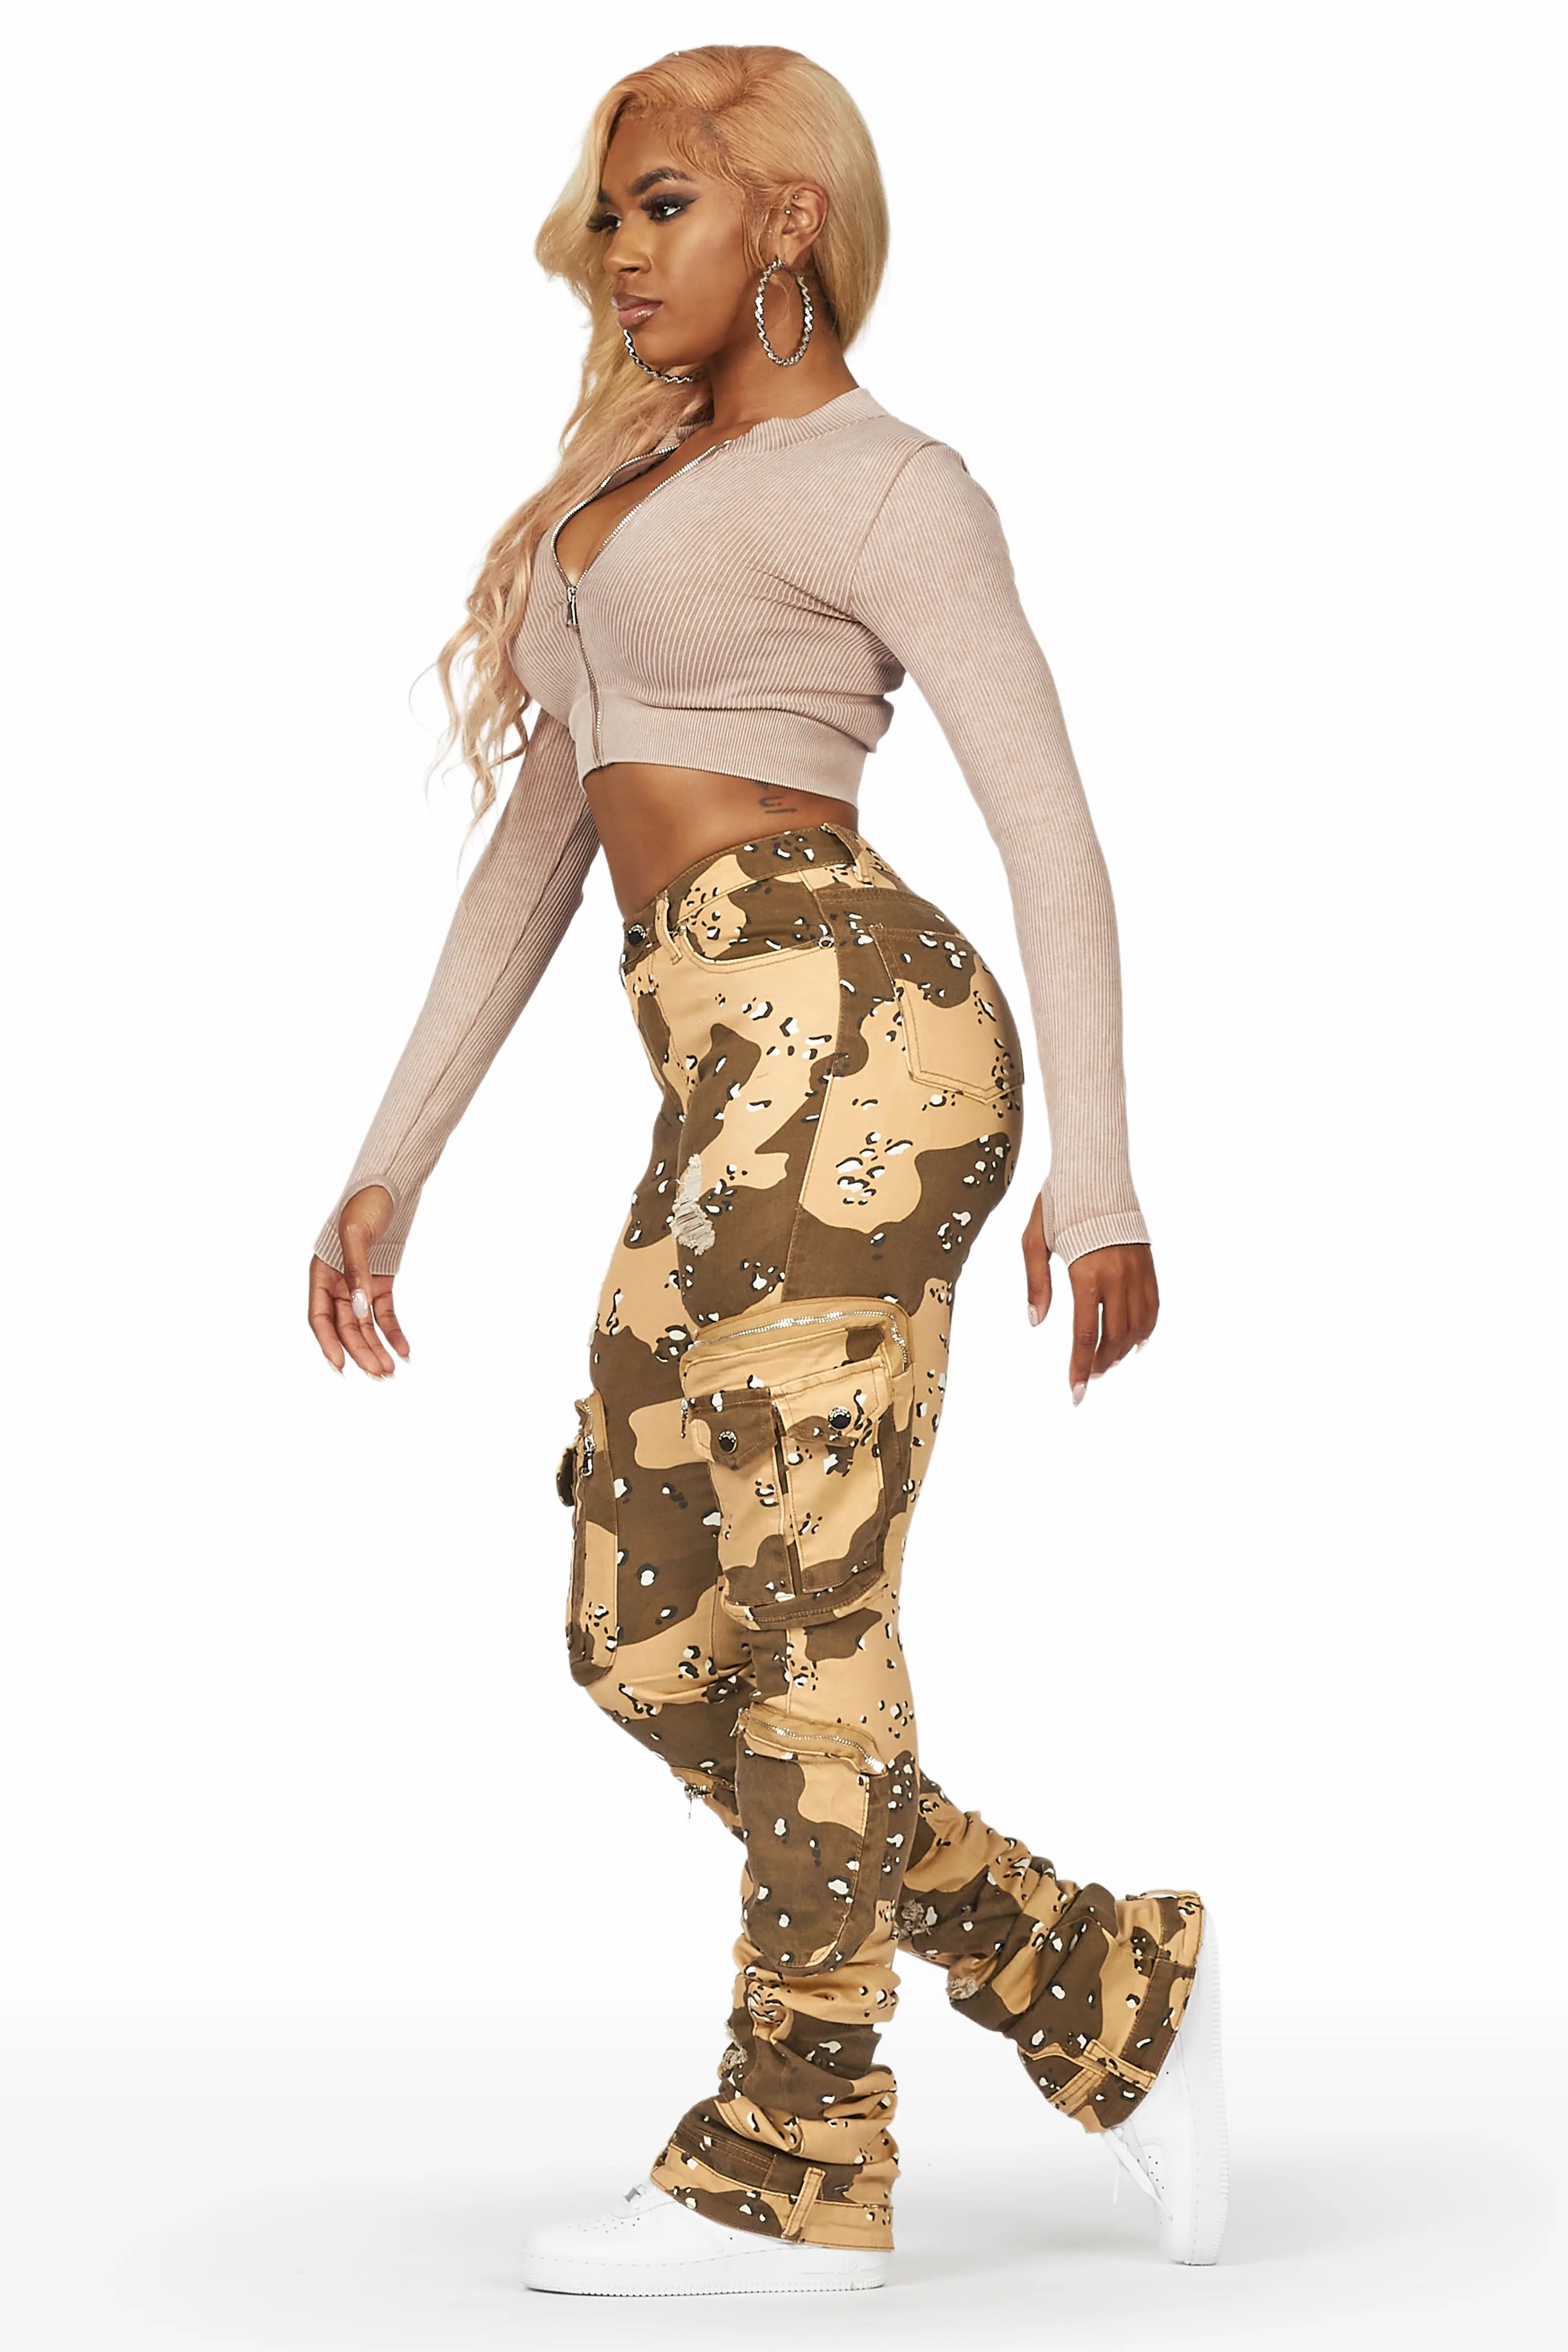 CAMO HQ - American Desert Night Camouflage Pattern (DNCP) CAMO Women's  Leggings with pockets